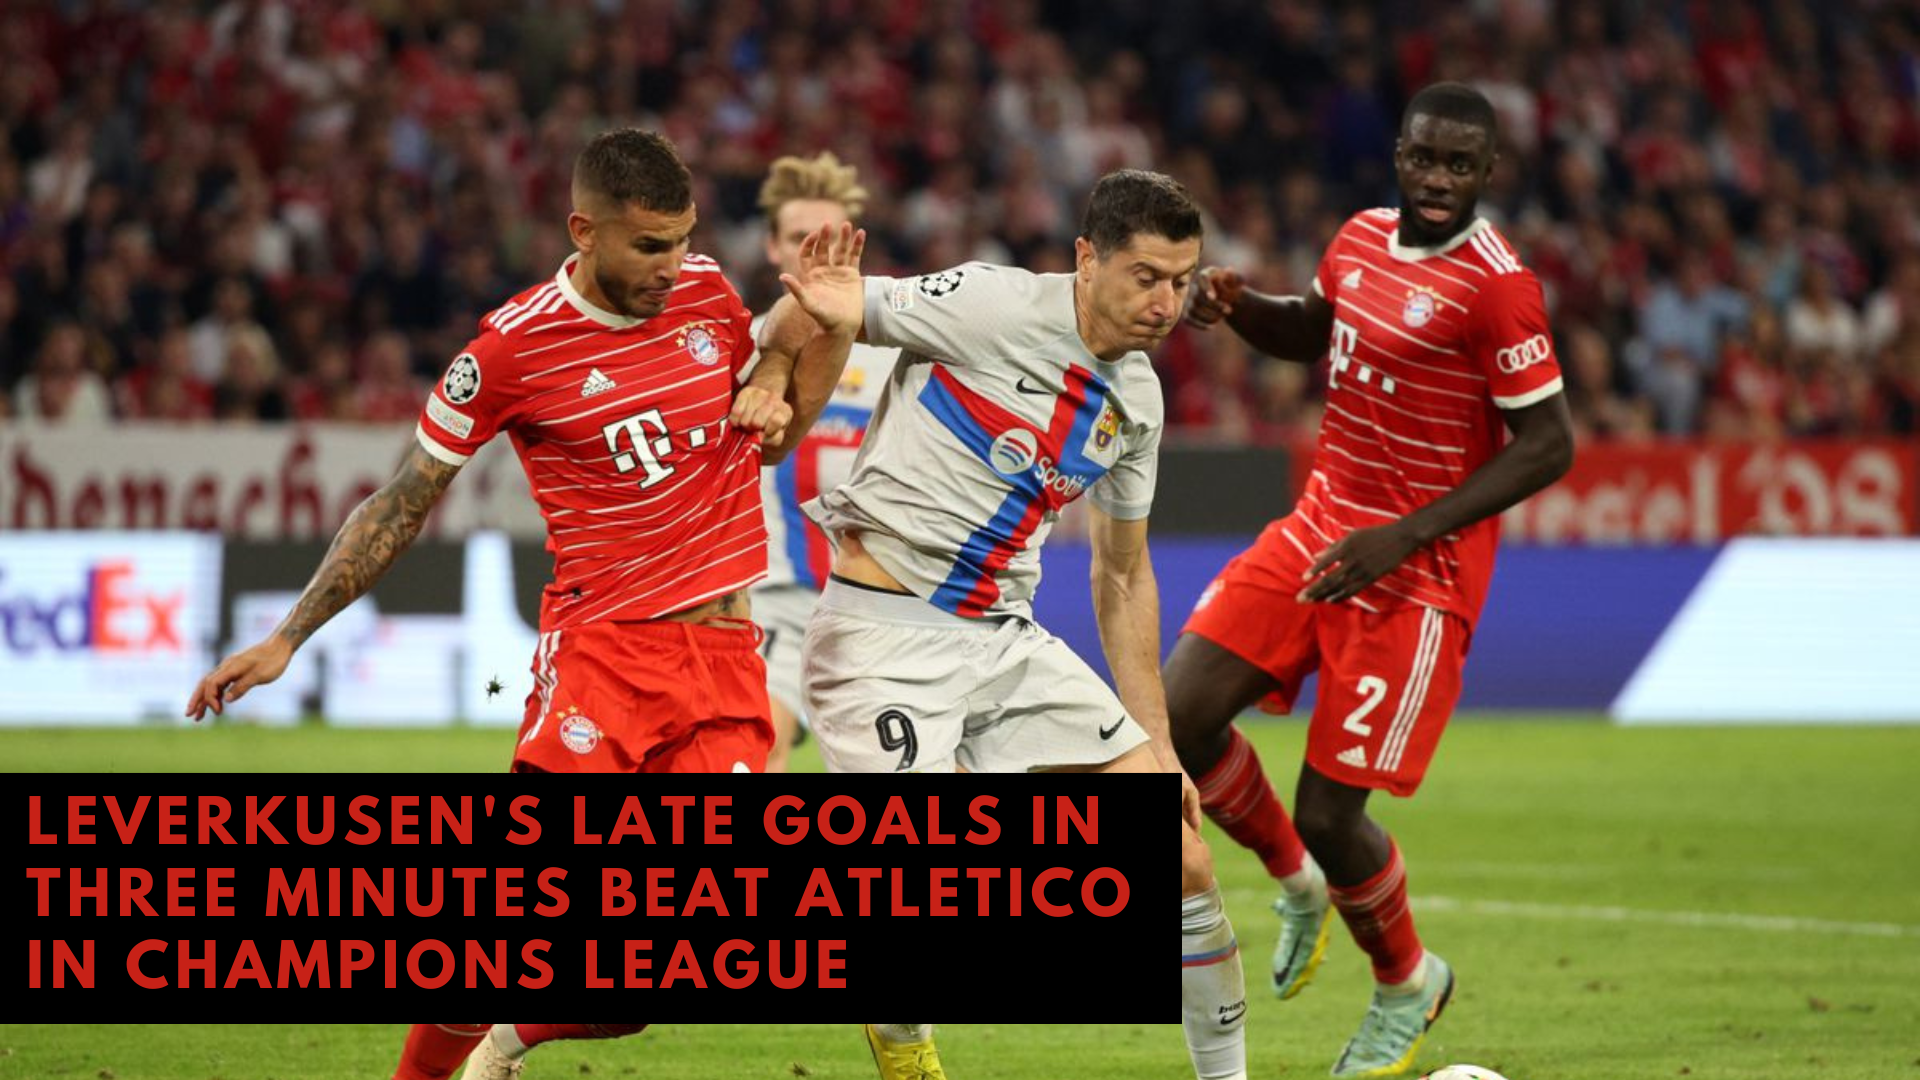 Leverkusen's Late Goals In Three Minutes Beat Atletico In Champions League